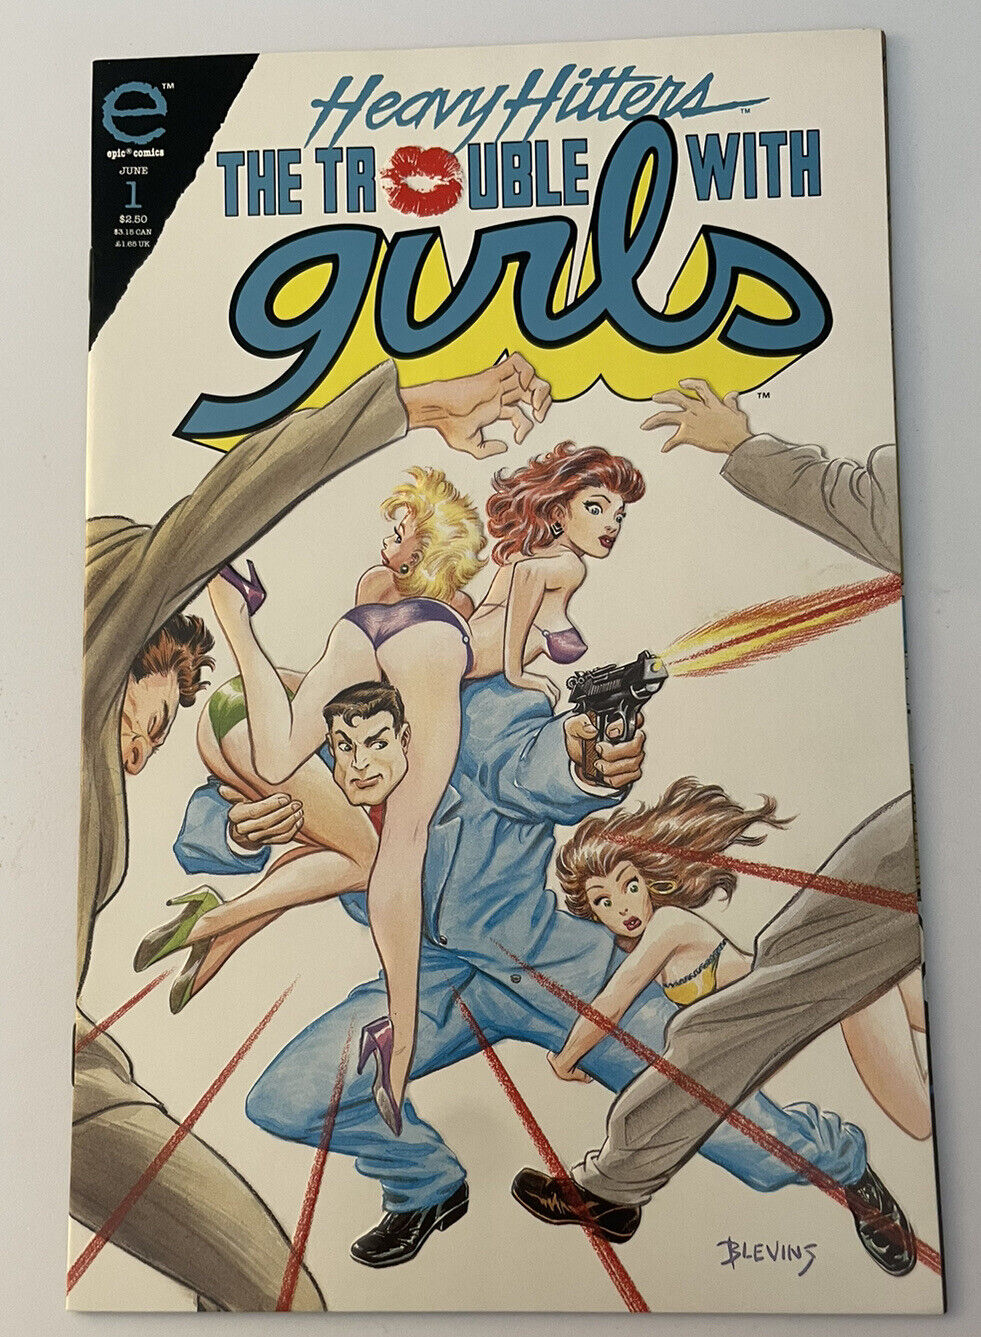 The Trouble With Girls, Heavy Hitters #1 June 1993 Epic Comics 1st Printing